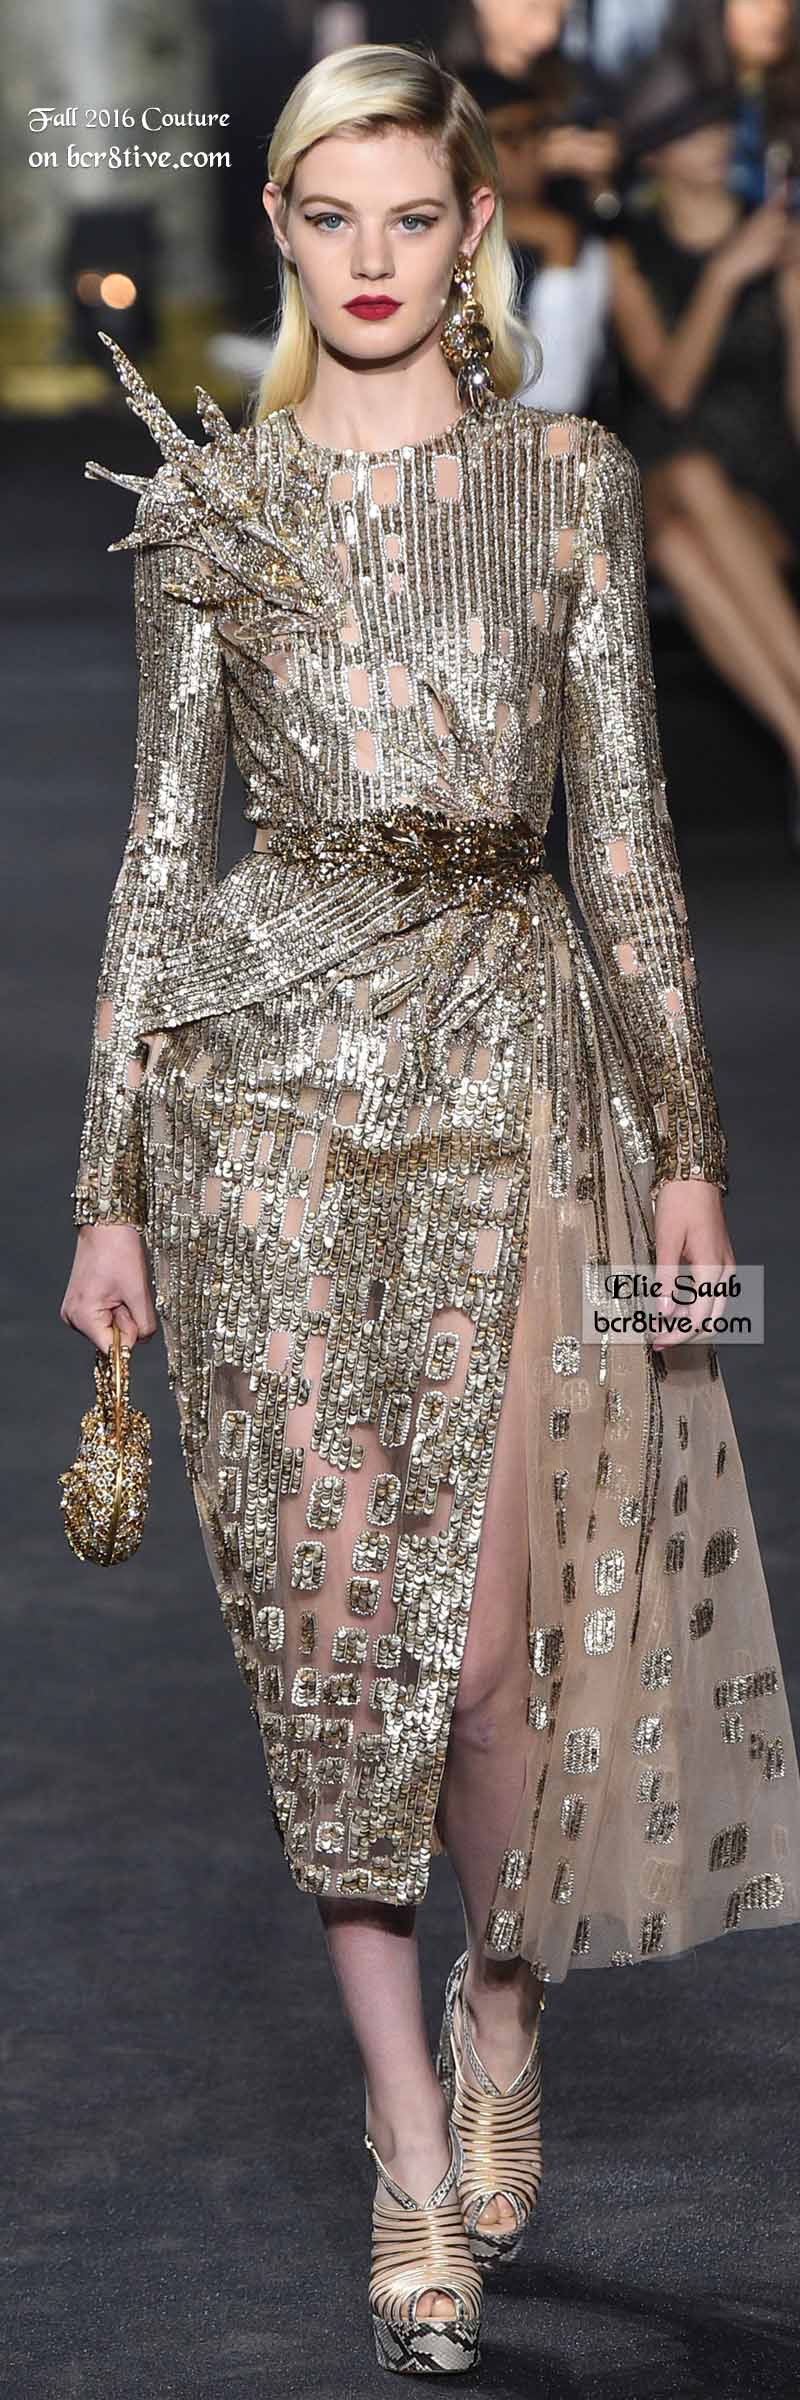 Elie Saab - The Best Fall 2016 Haute Couture Fashion